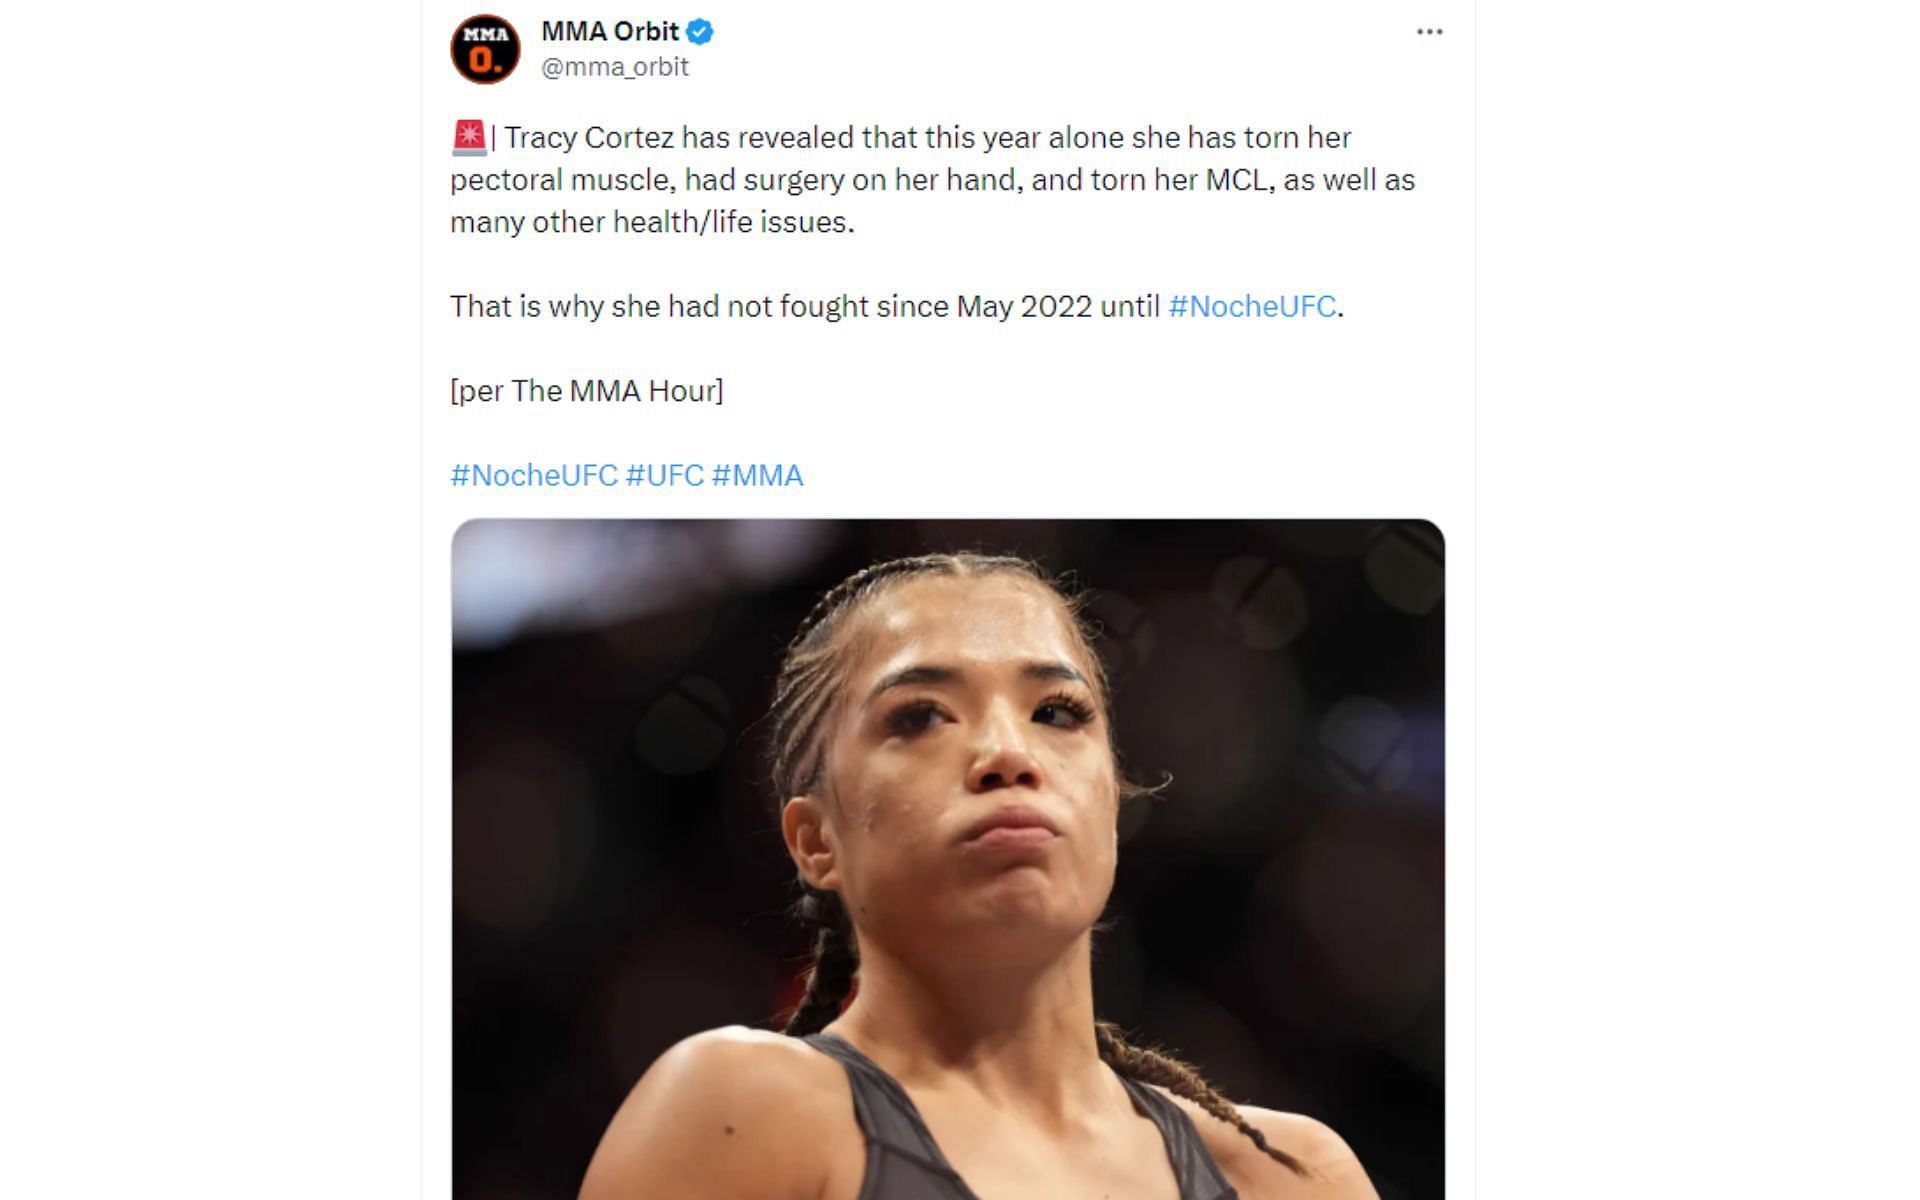 Tweet regarding the comments made on The MMA Hour